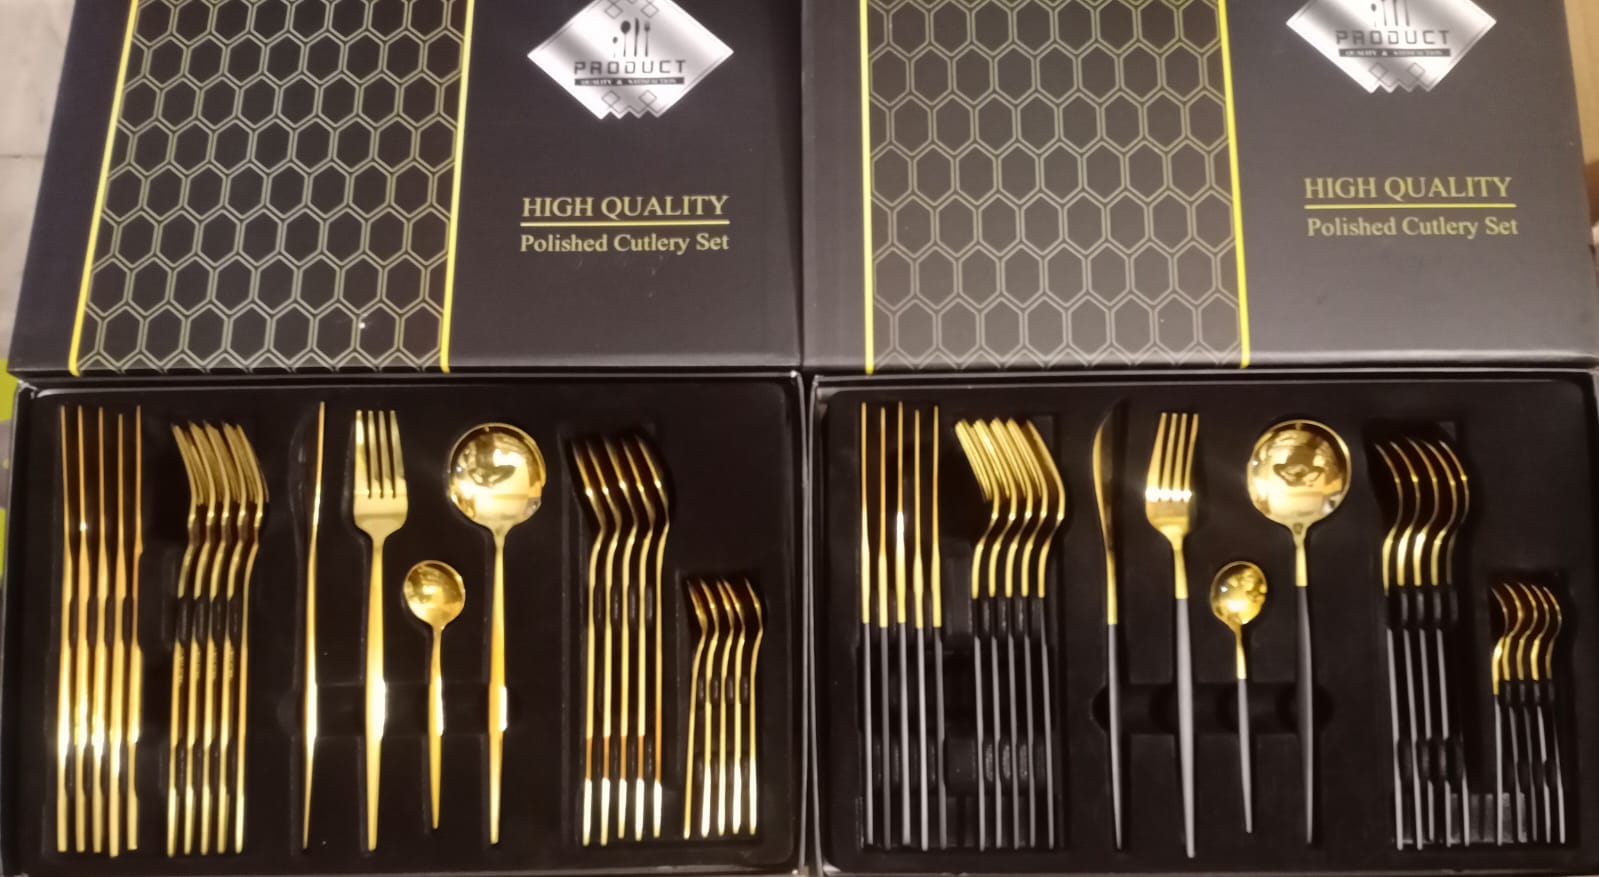 24 PIECES STAINLESS STEEL CUTLERY SET